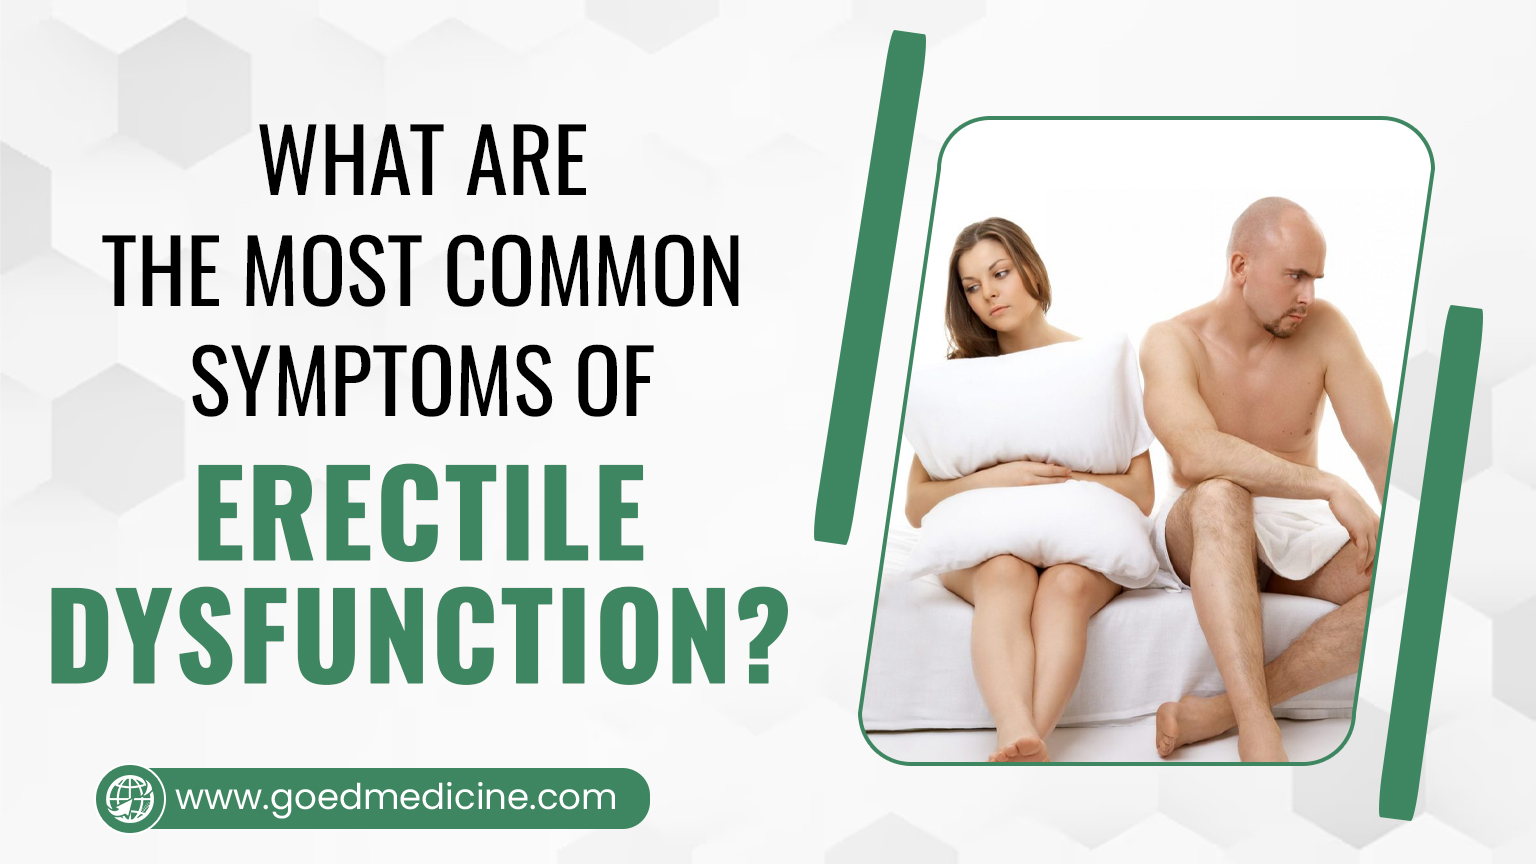 What Are the Most Common Symptoms of Erectile Dysfunction